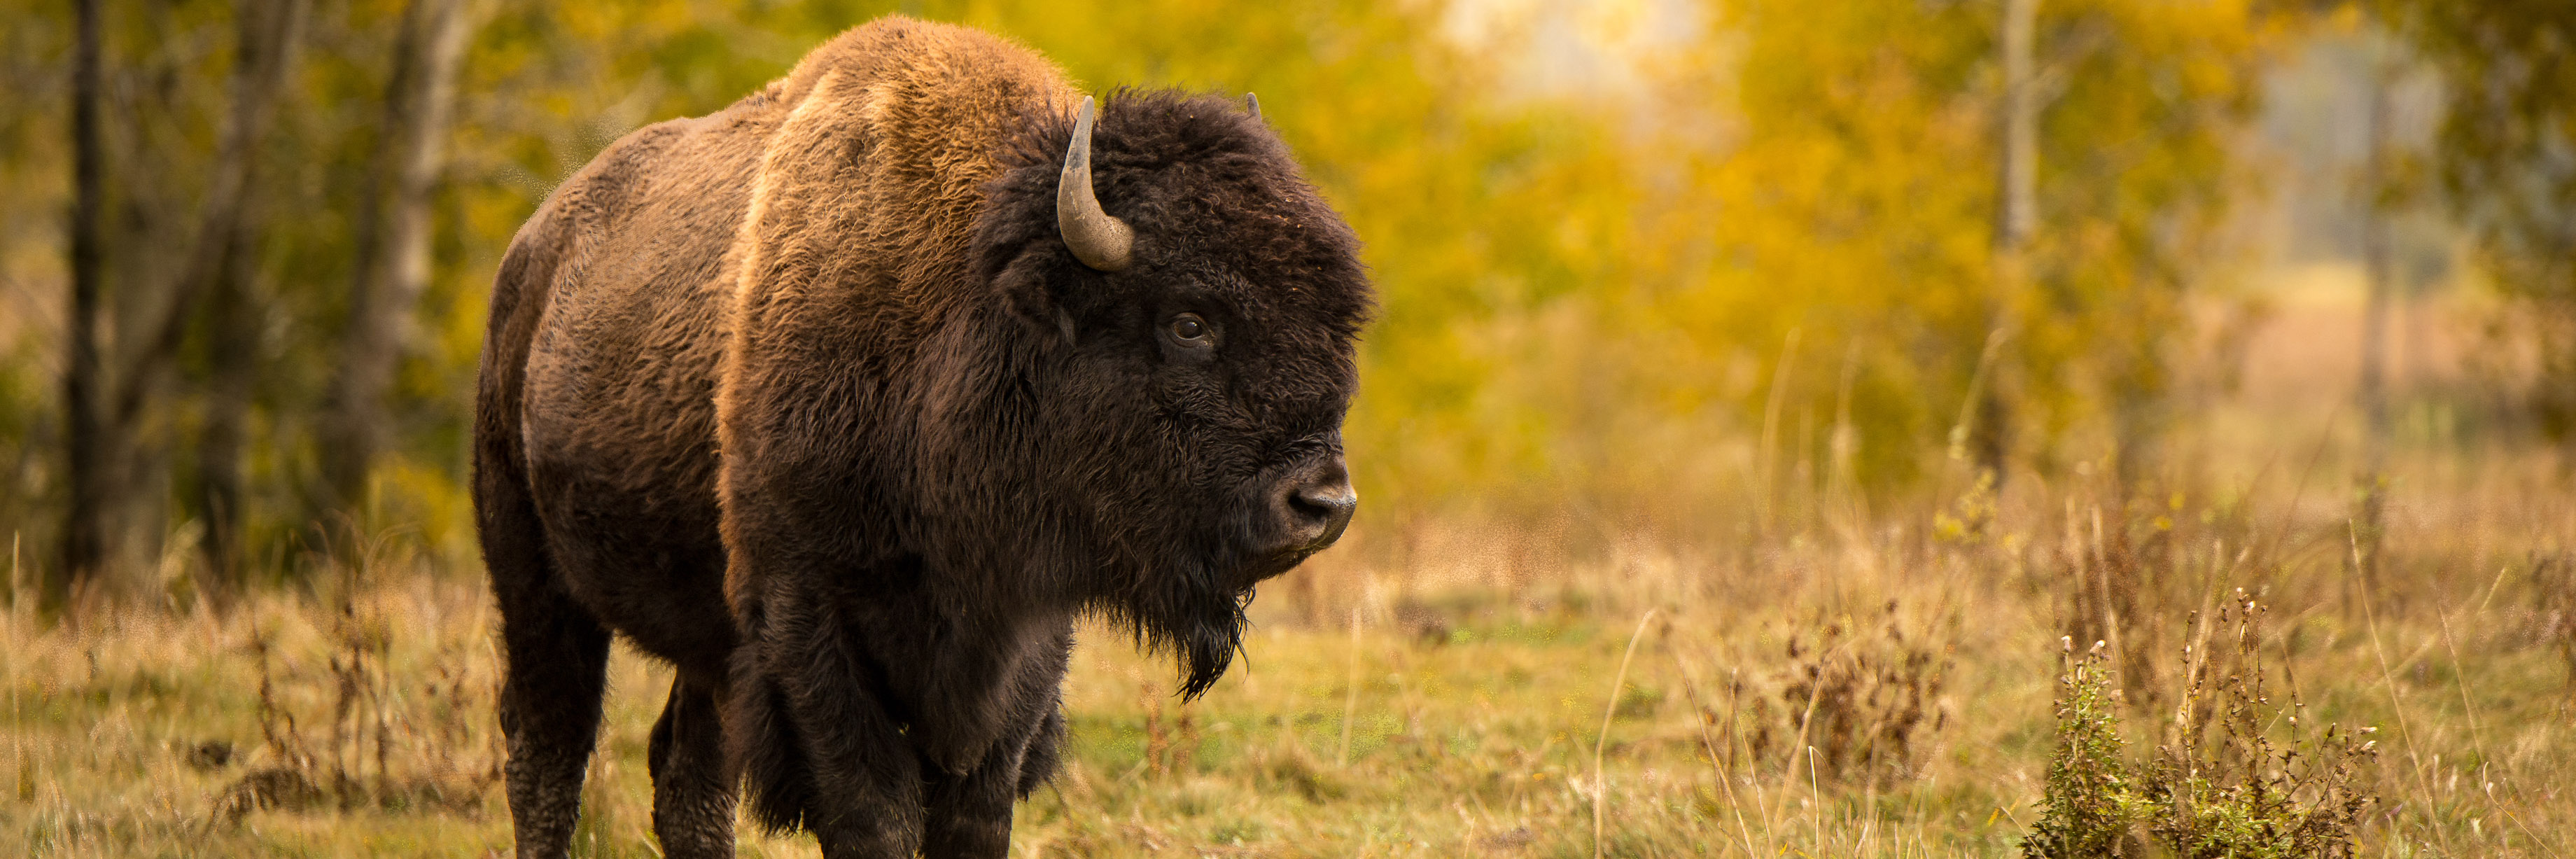 Bison stands in a field amongst trees in the season of fall. 